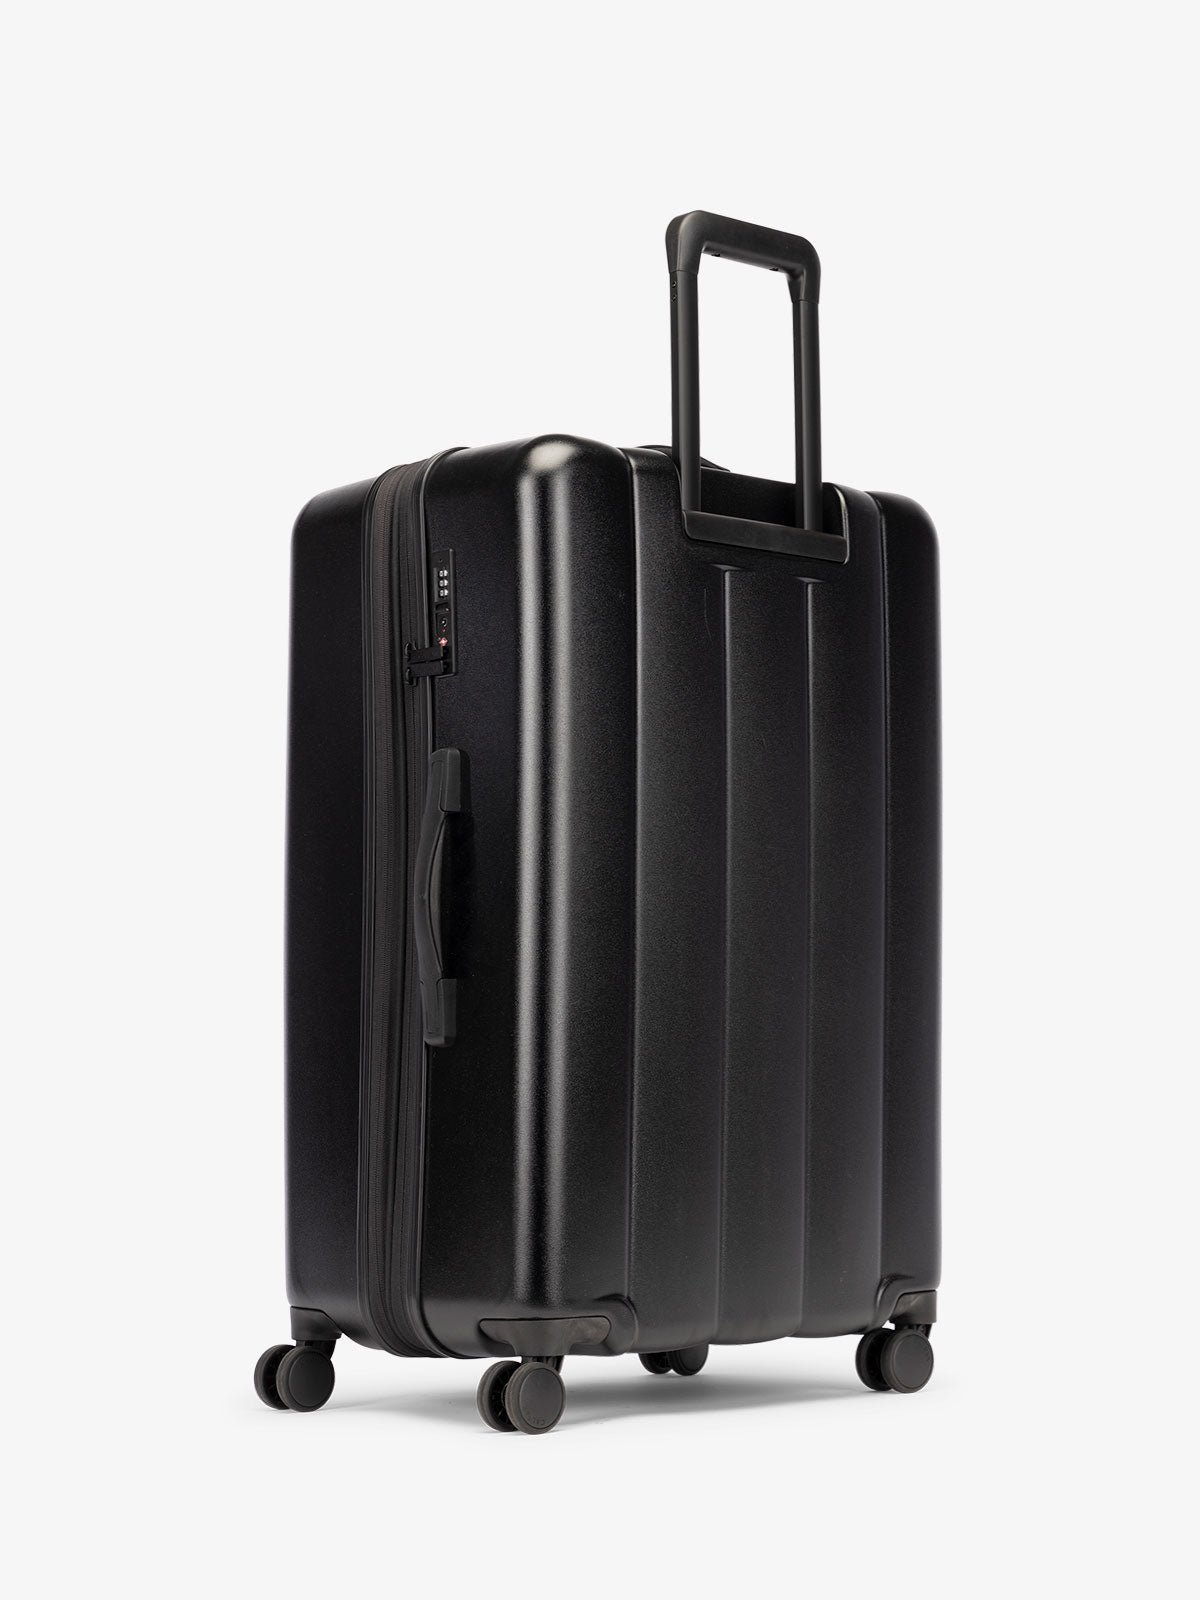 CALPAK large luggage featuring dual spinner wheels and bottom grab handle in black